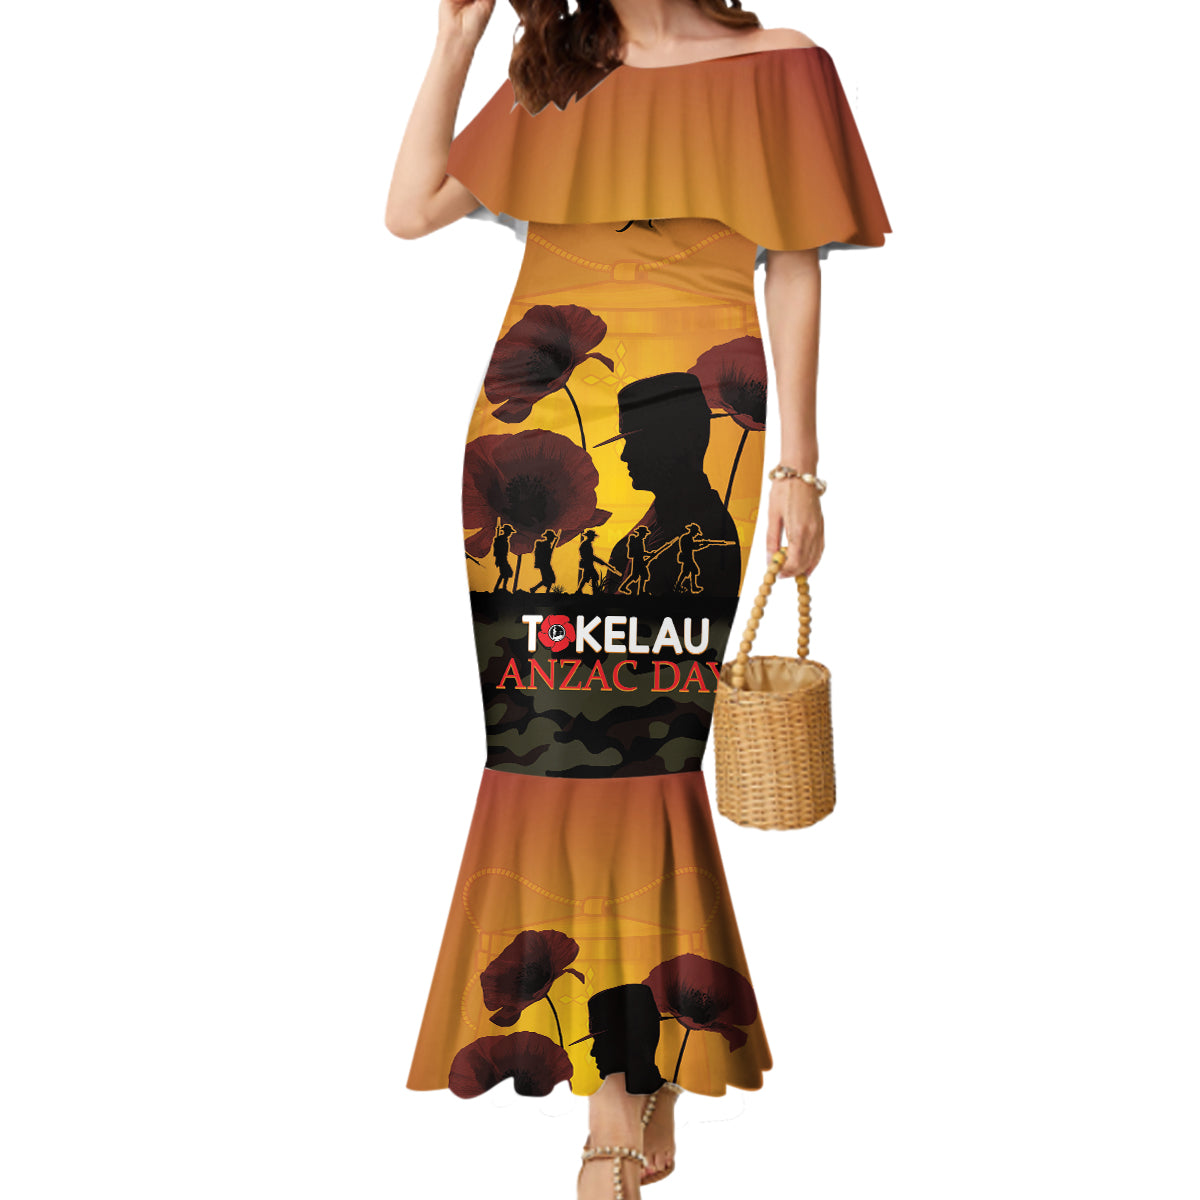 Tokelau ANZAC Day Mermaid Dress Camouflage With Poppies Lest We Forget LT14 Women Yellow - Polynesian Pride